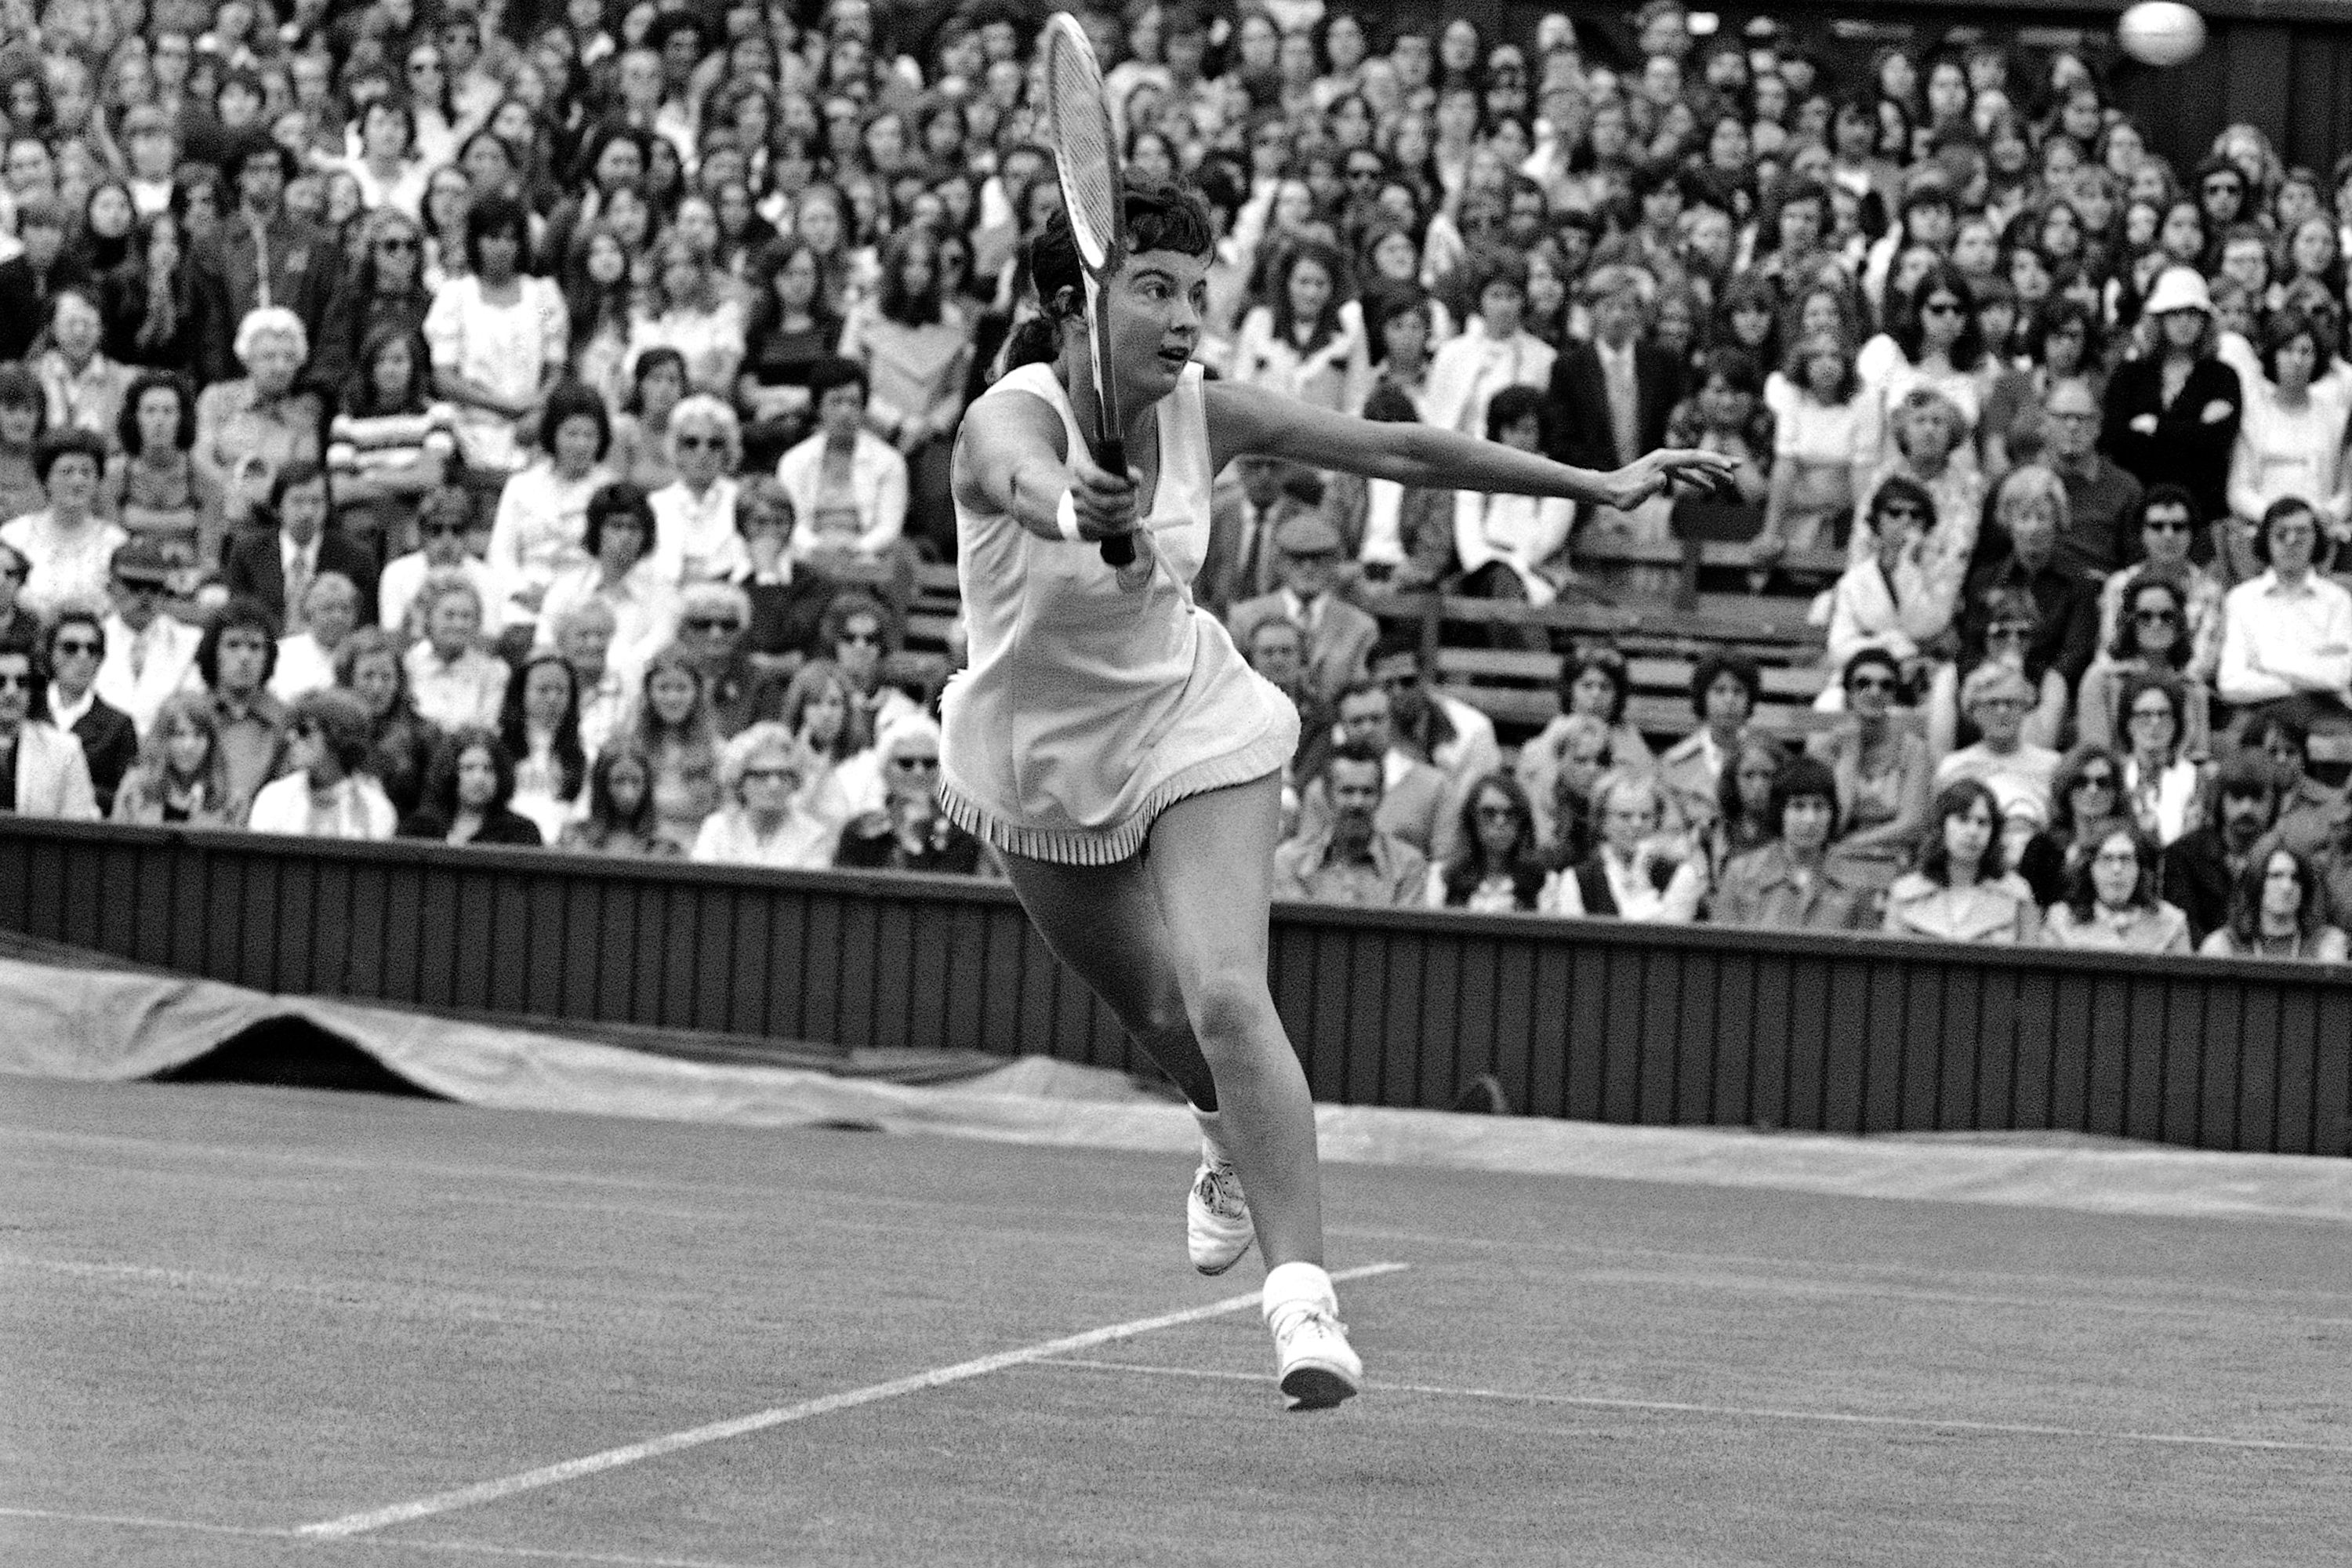 counter tea the Internet Original 9 trailblazers stood for tennis equality in 1970